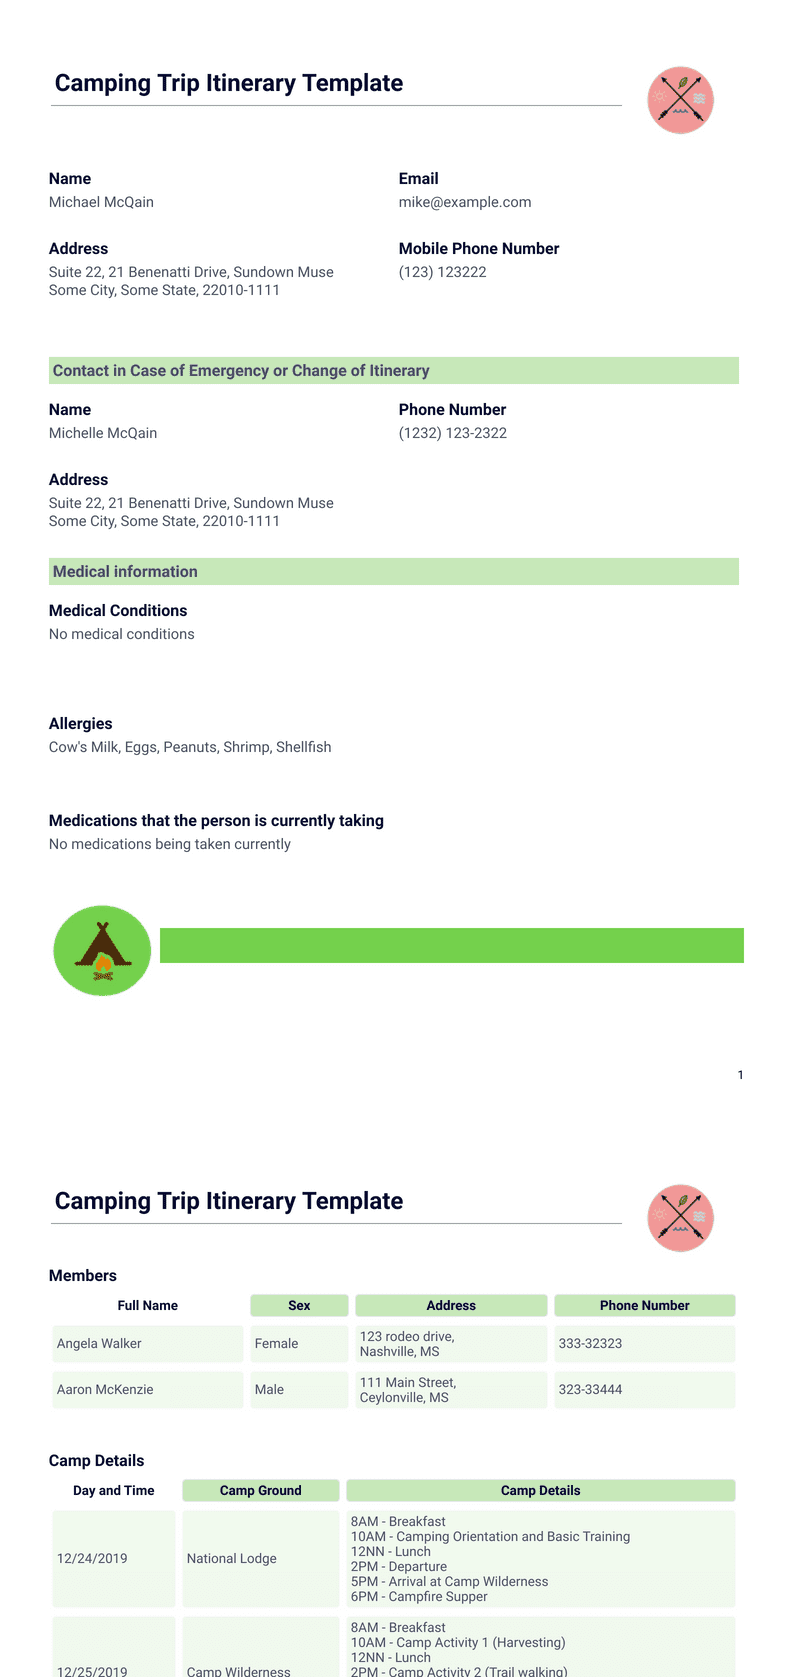 Camping Trip Itinerary Template